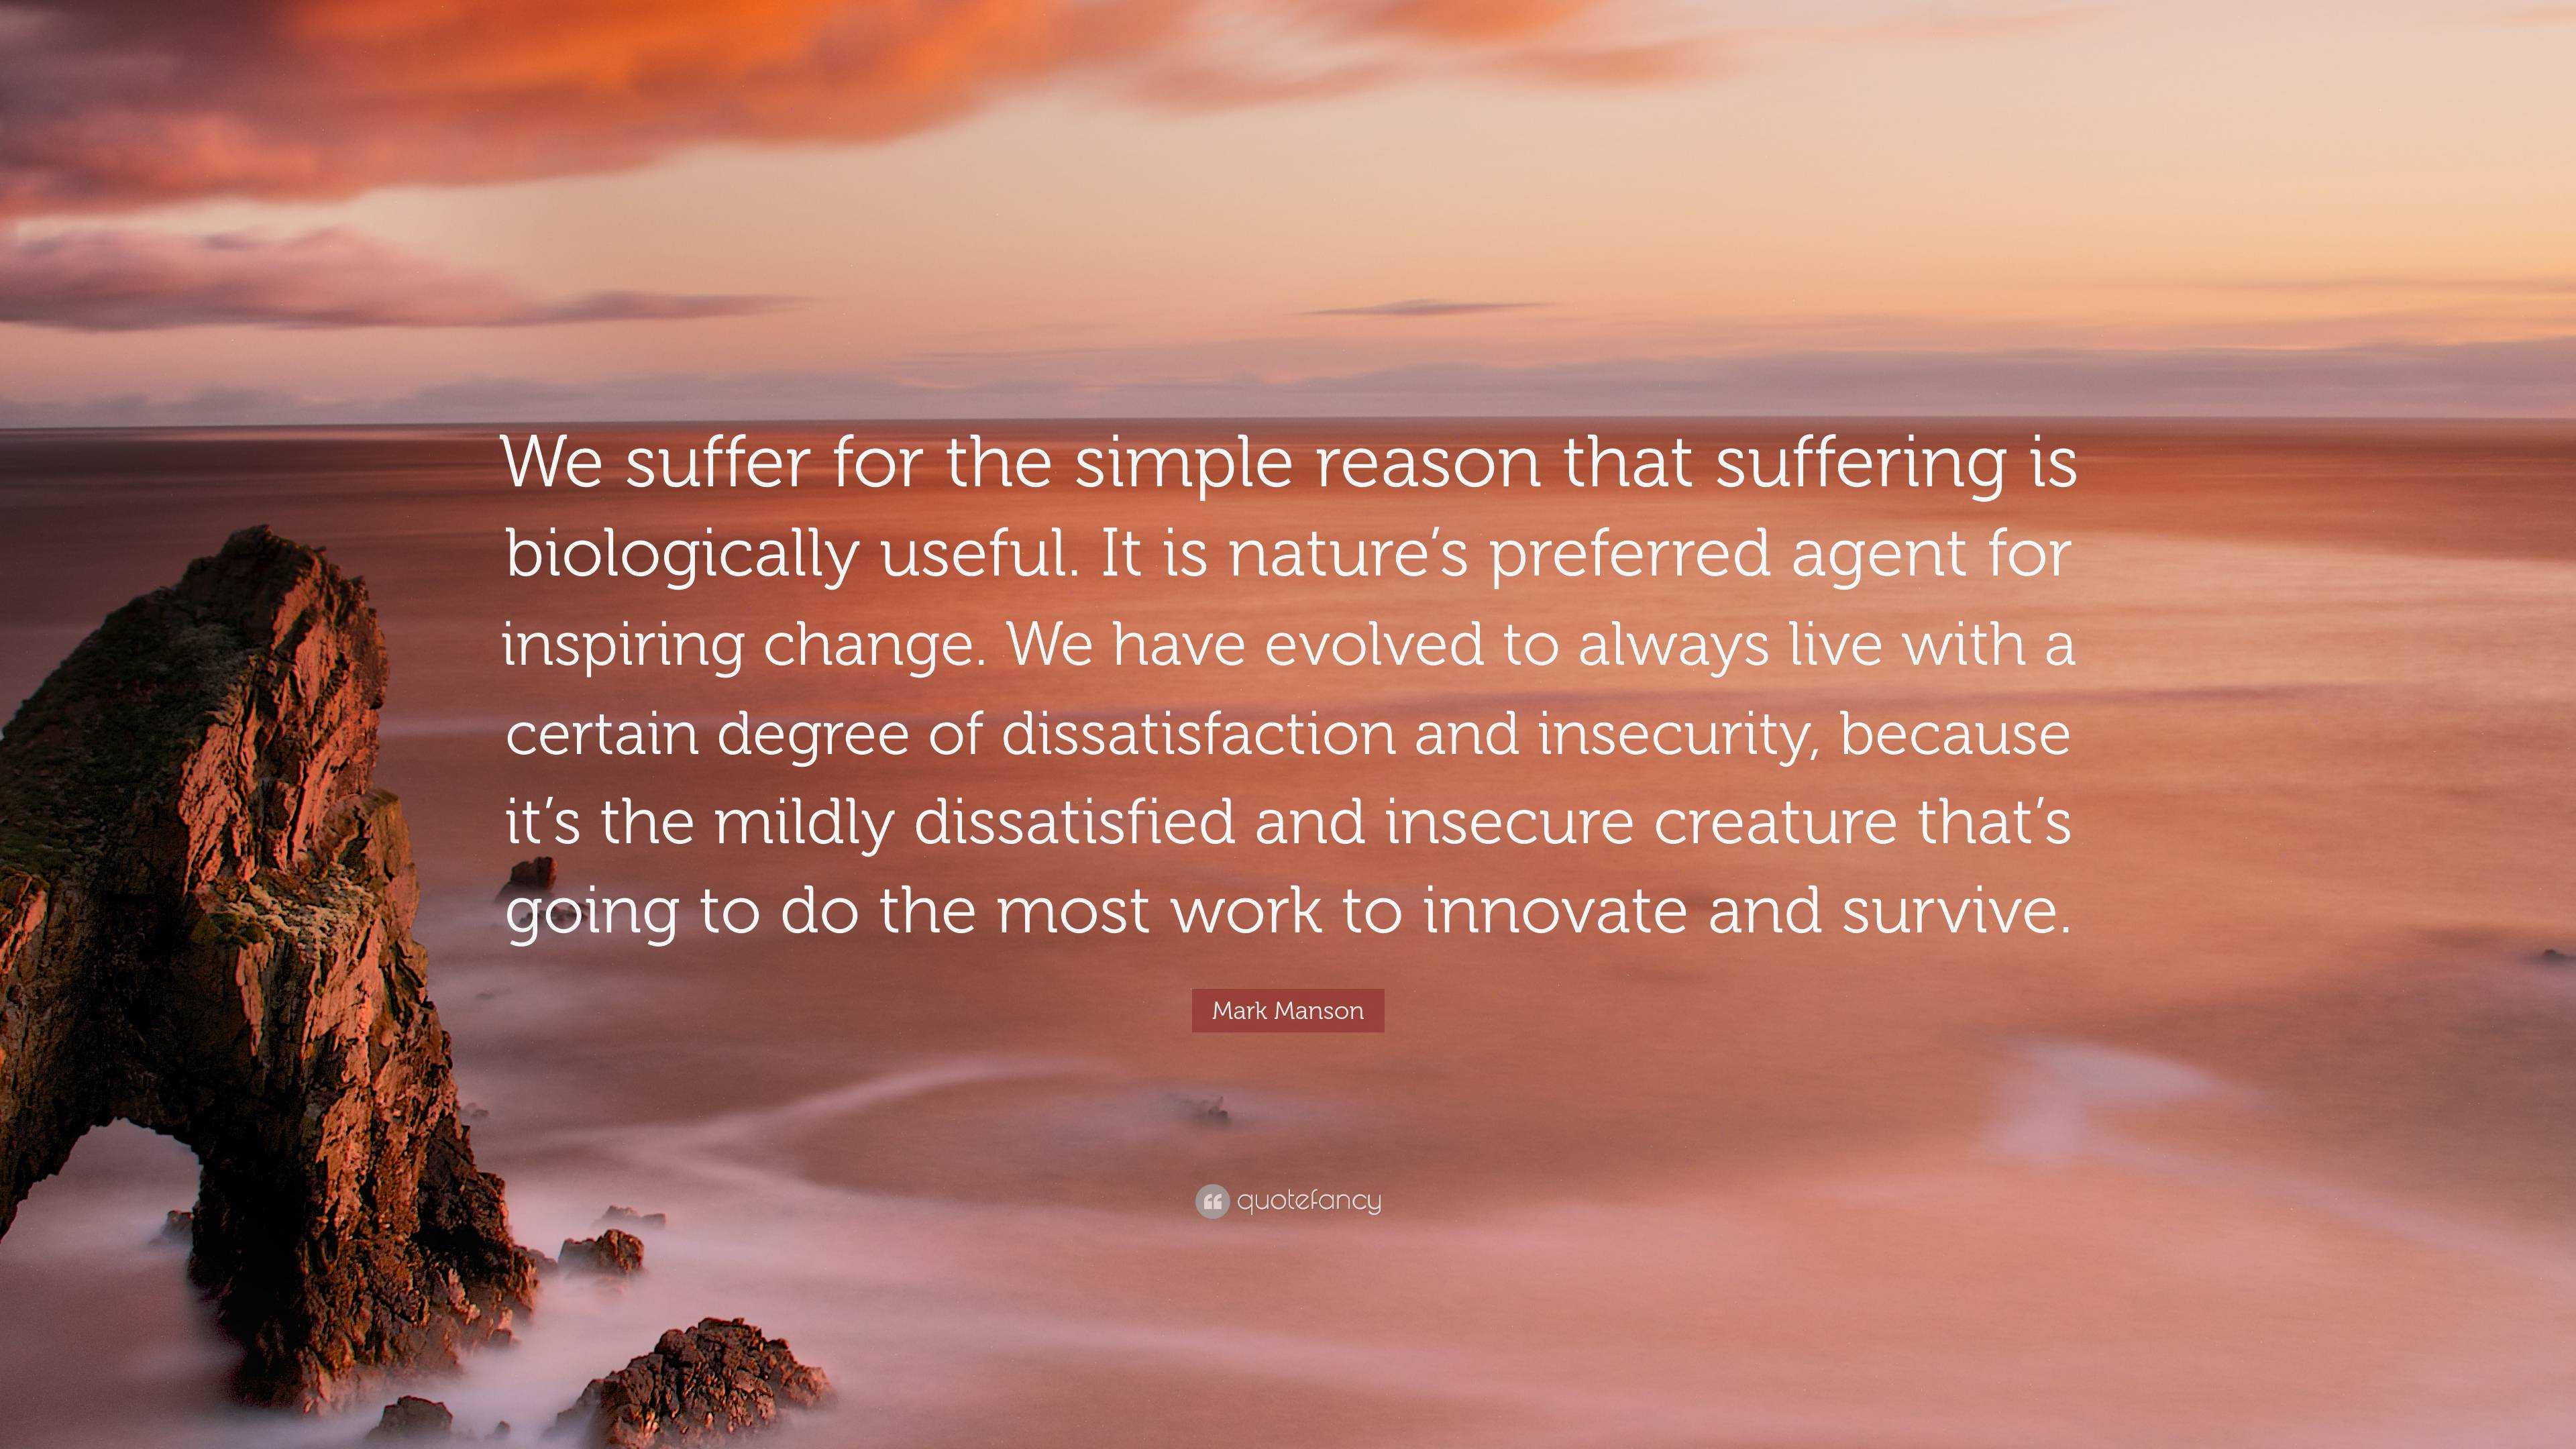 Mark Manson Quote: “We suffer for the simple reason that suffering is